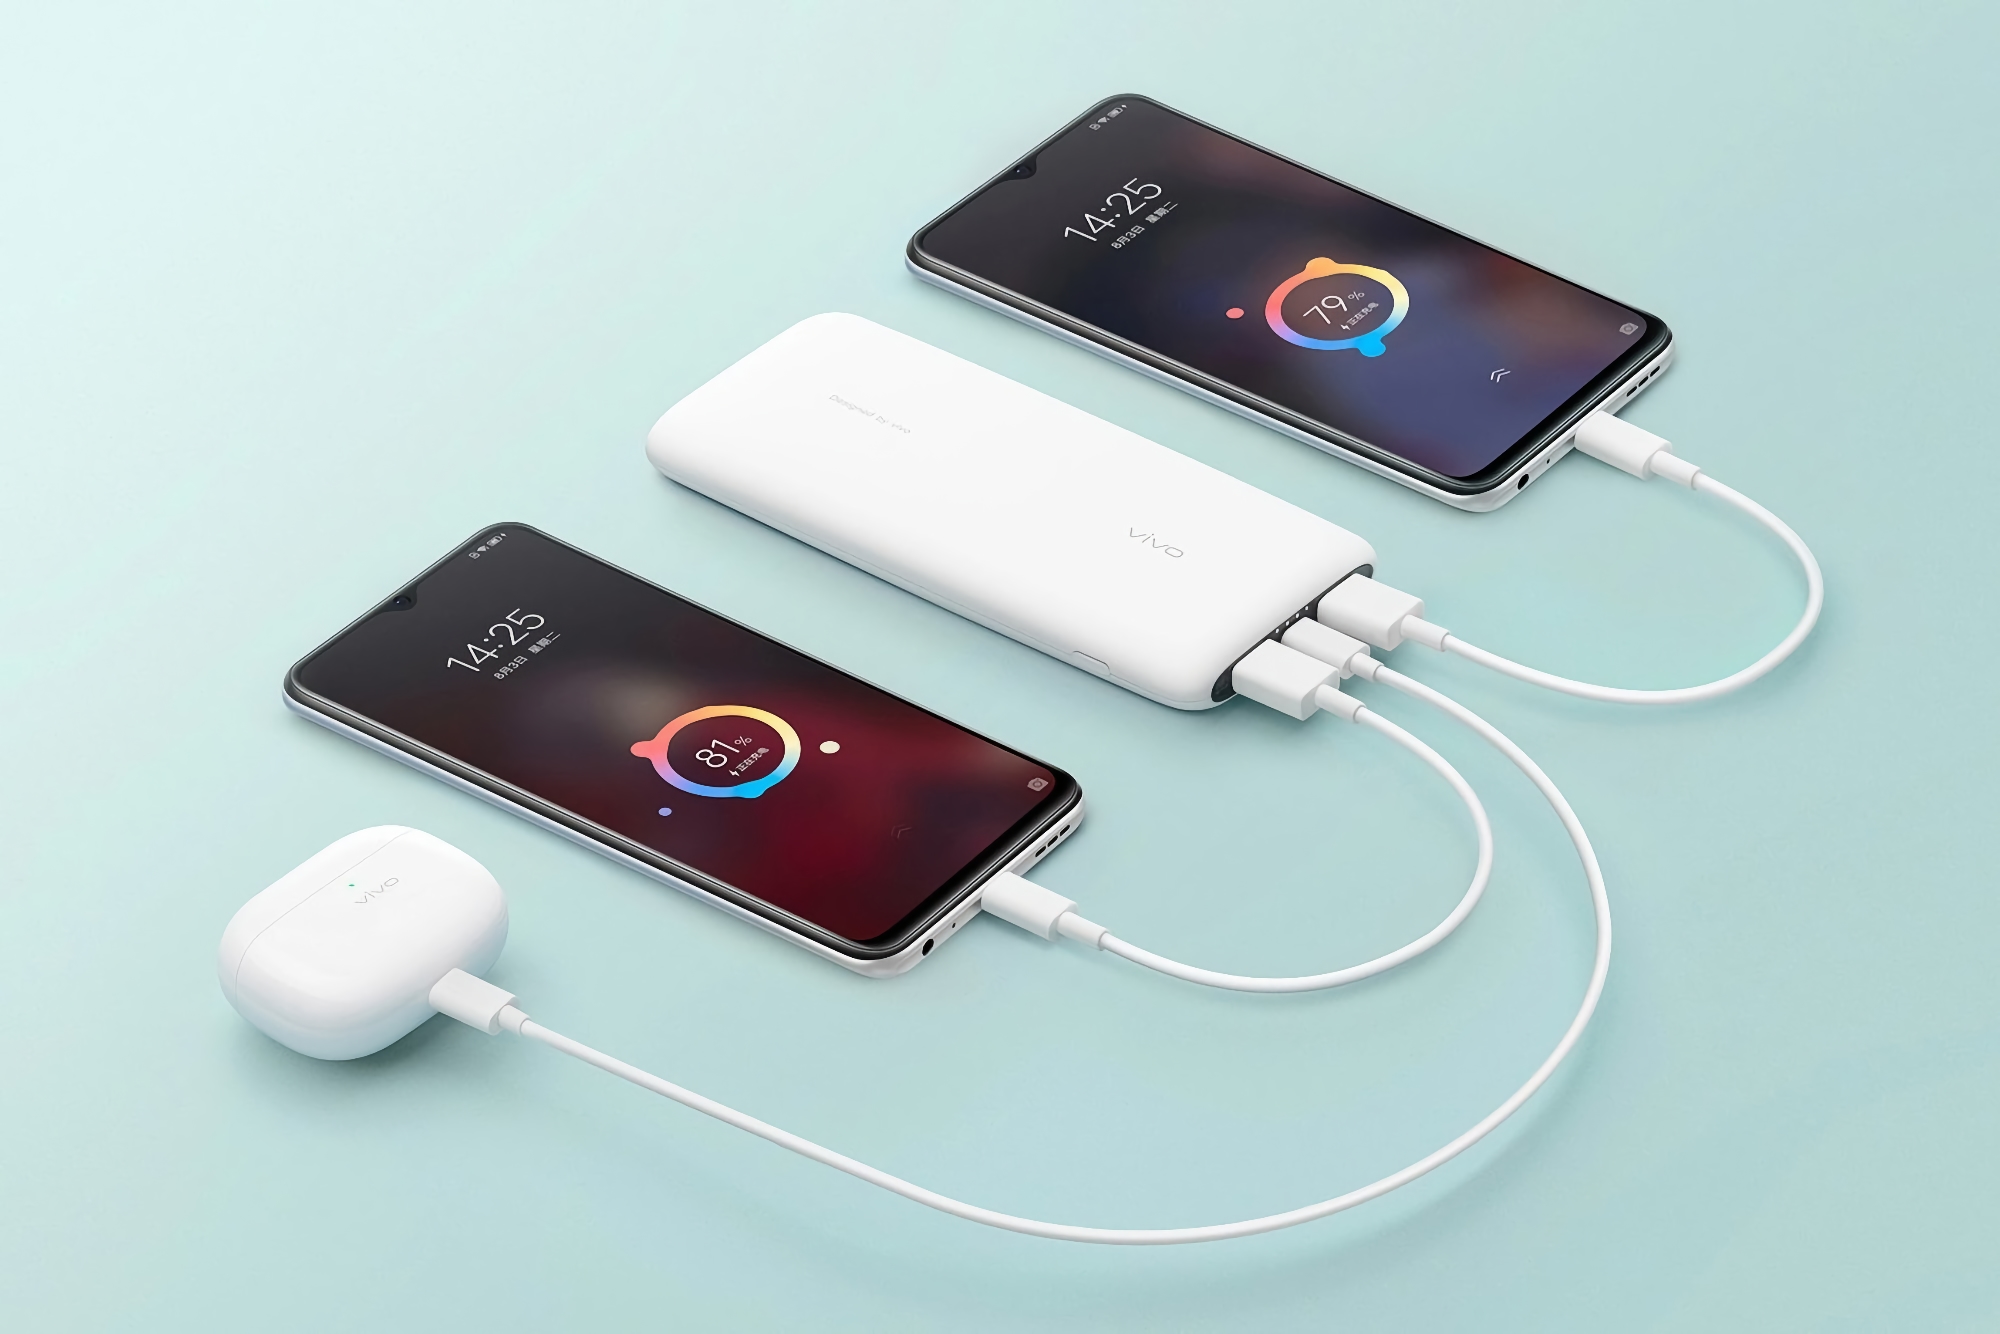 Vivo unveiled 20W Fast Charging Power Bank: a portable 10,000mAh battery with 20W charging support for $26